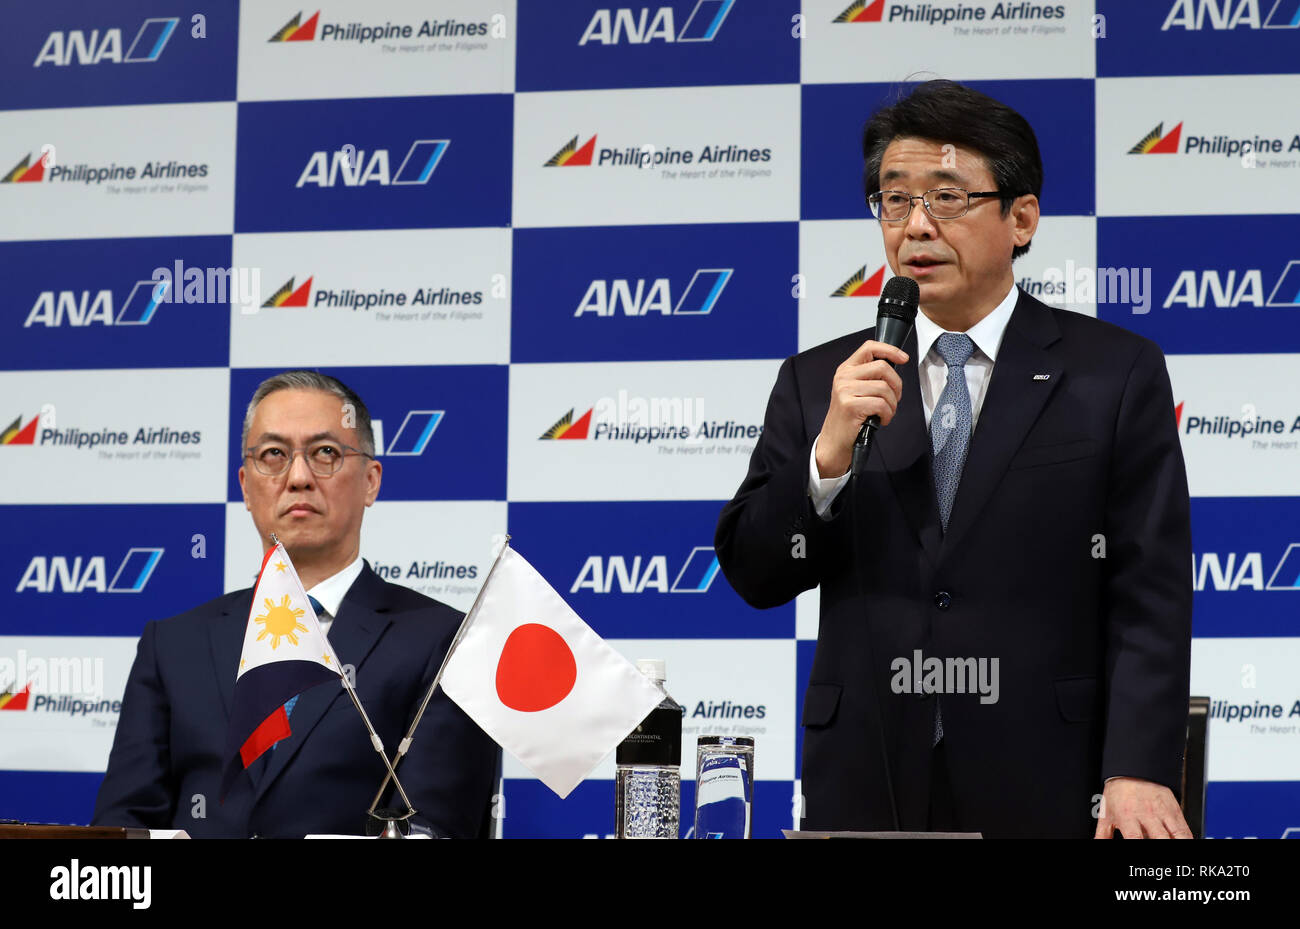 Tokyo, Japan. 8th Feb, 2019. ANA Holdings president Shinya Katanozaka (R) speaks while LT Group president and PAL Holdings director Michael Tan (L) looks on as they announce the companies expand their partnerships in Tokyo on Friday, February 8, 2019. ANA Holdings will invest 95 million U.S. dollars to PAL Holdings and acquire 9.5 percent of PAL Holdings shares. Credit: Yoshio Tsunoda/AFLO/Alamy Live News Stock Photo